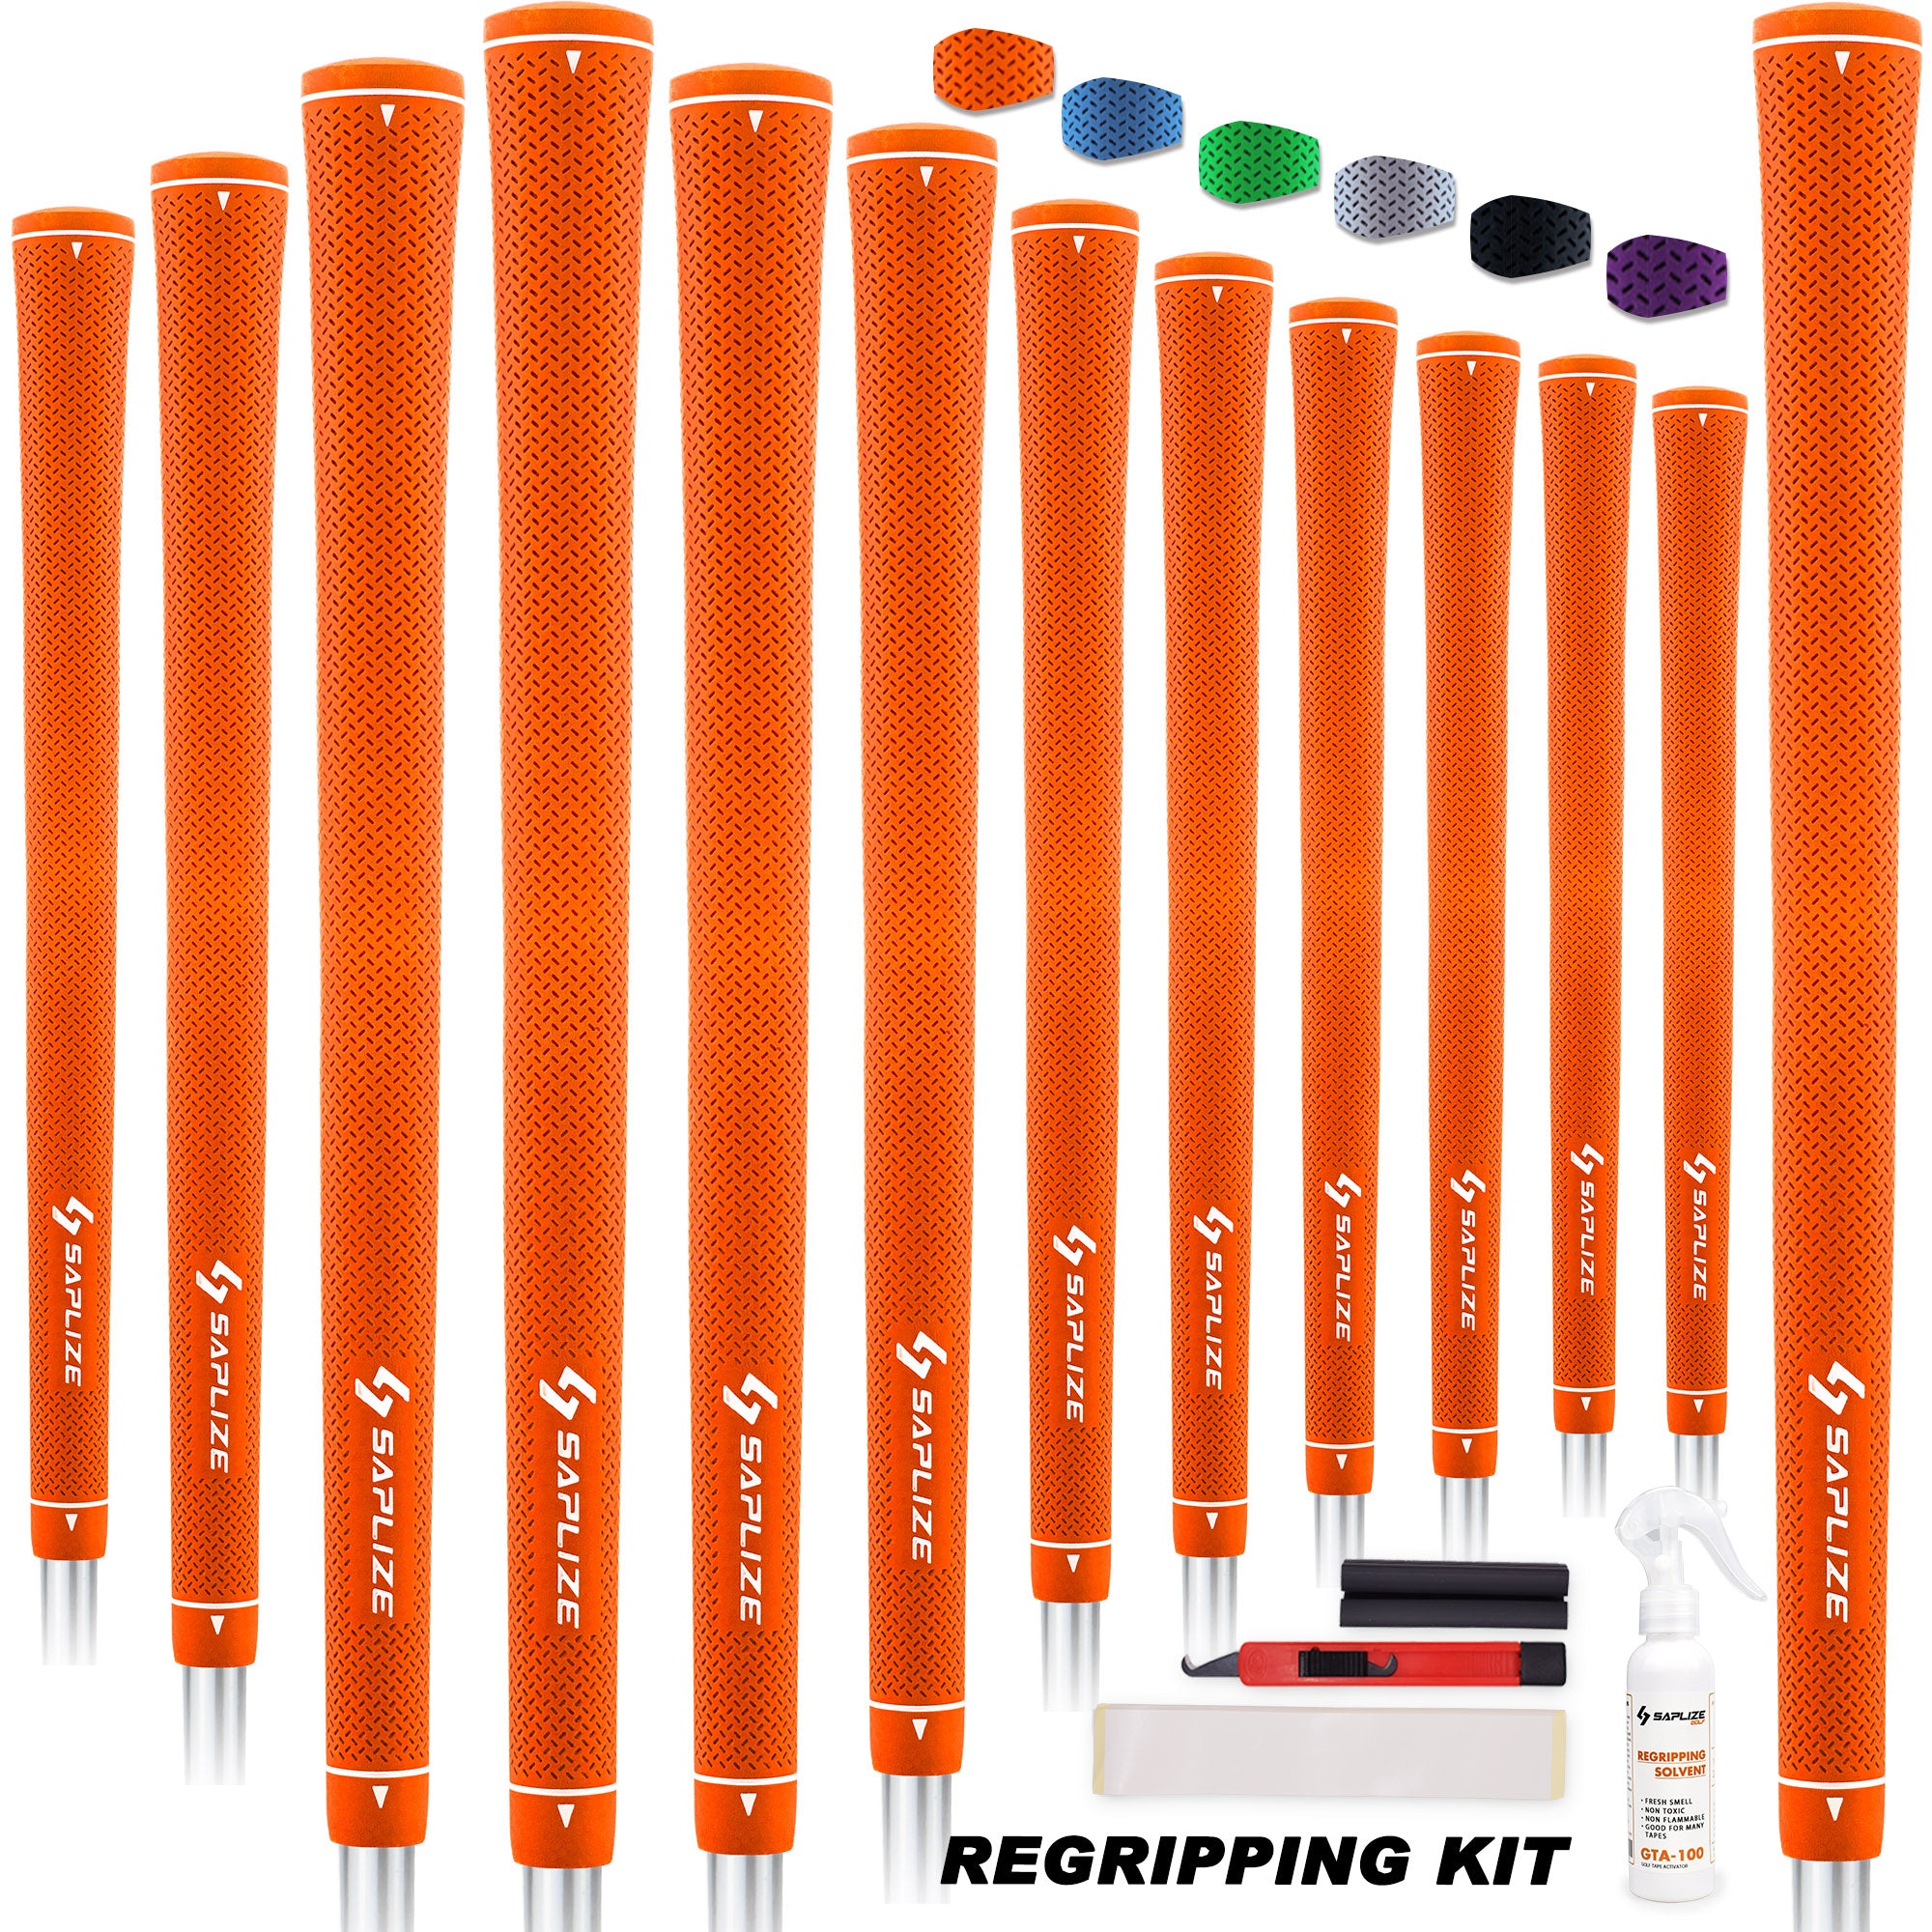 CC02 Rubber Golf Grips 13 pcs Pack with Solvent/Tape Kit